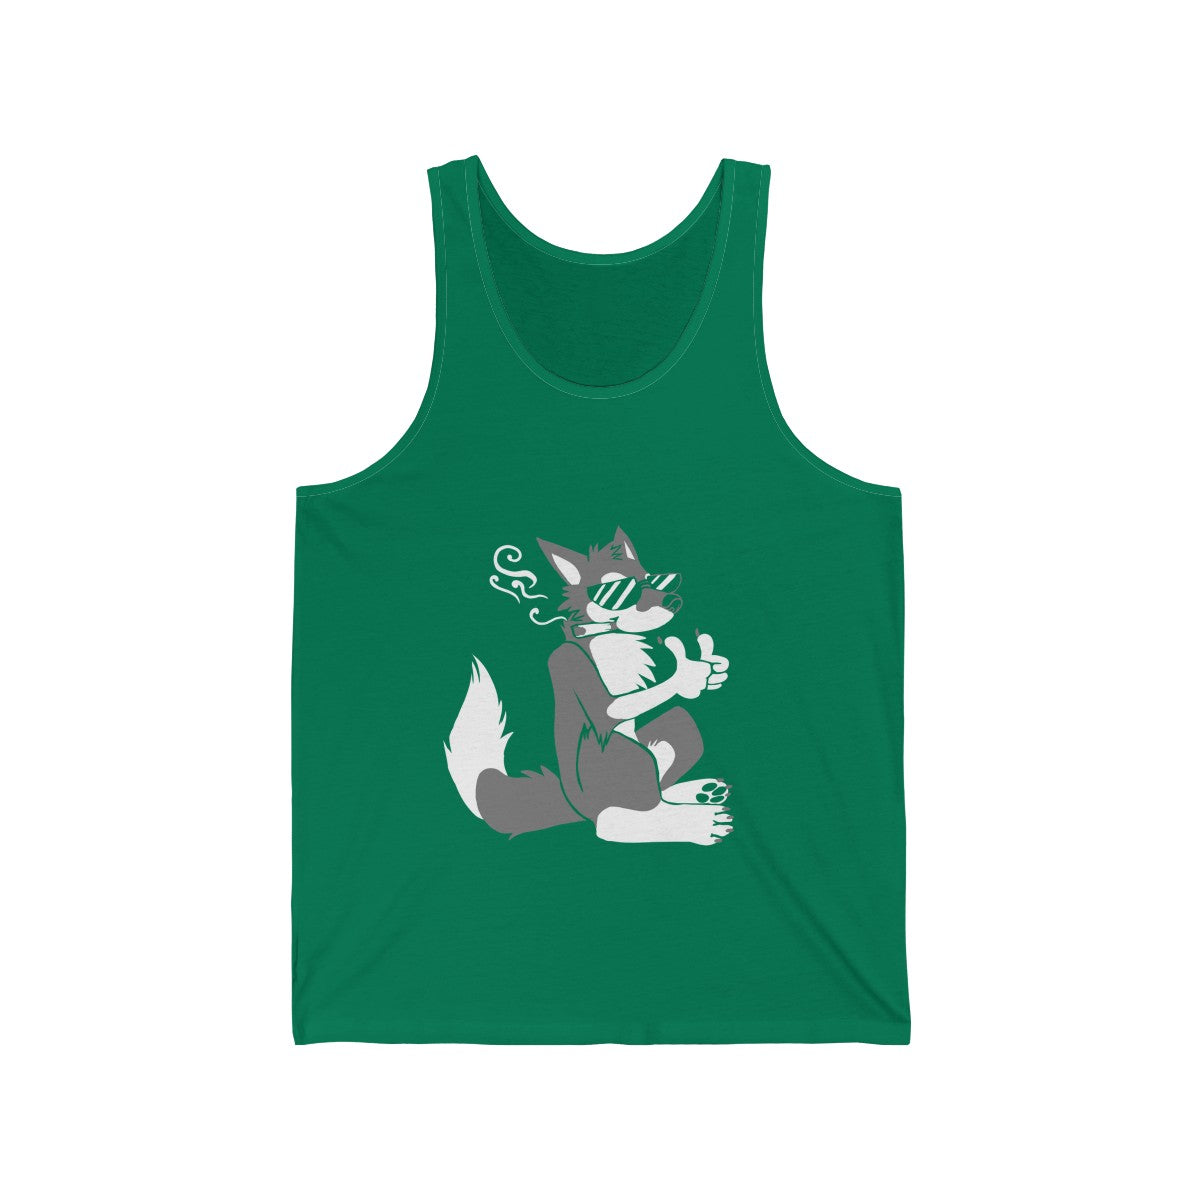 Chill Out - Tank Top Tank Top Dire Creatures Green XS 